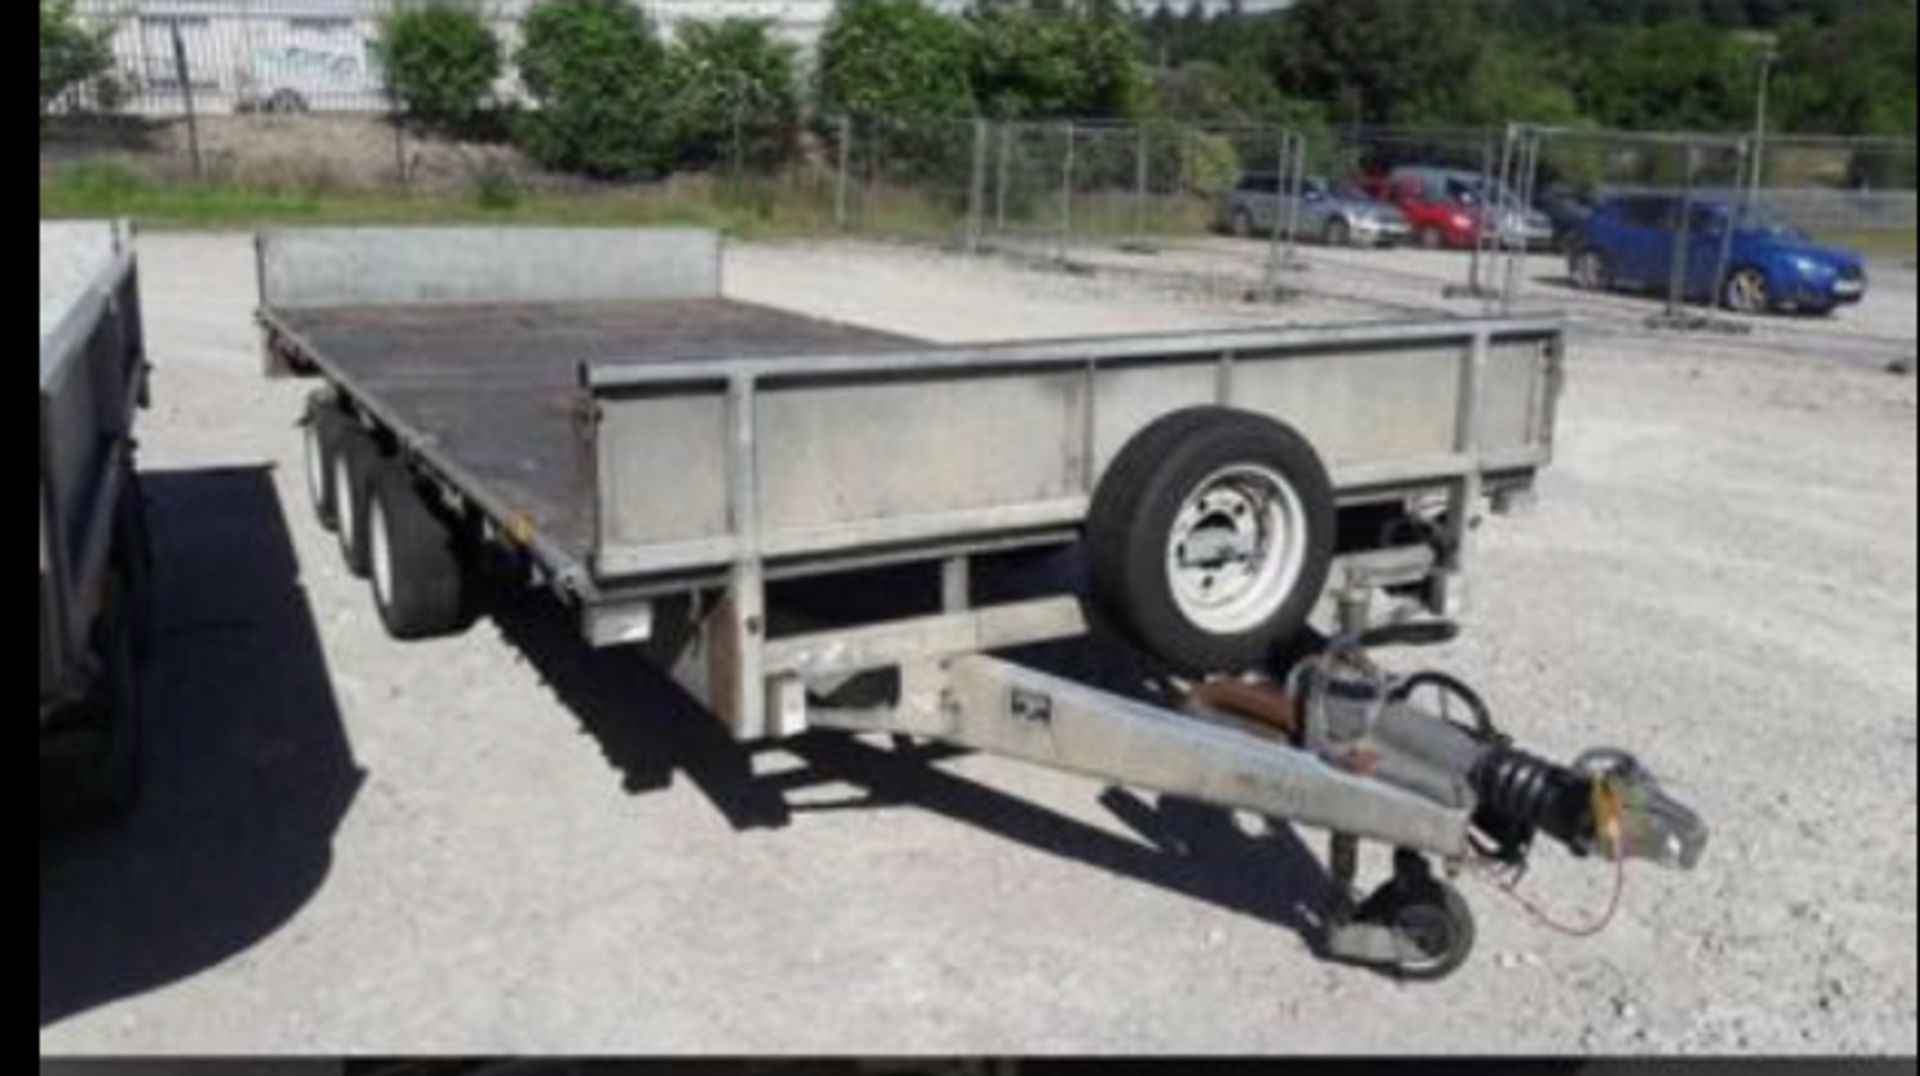 IFOR WILLIAMS LM187G TRI AXLE FLATBED PLANT TRAILER 3.5T LOCATION: SCOTLAND - Image 2 of 7